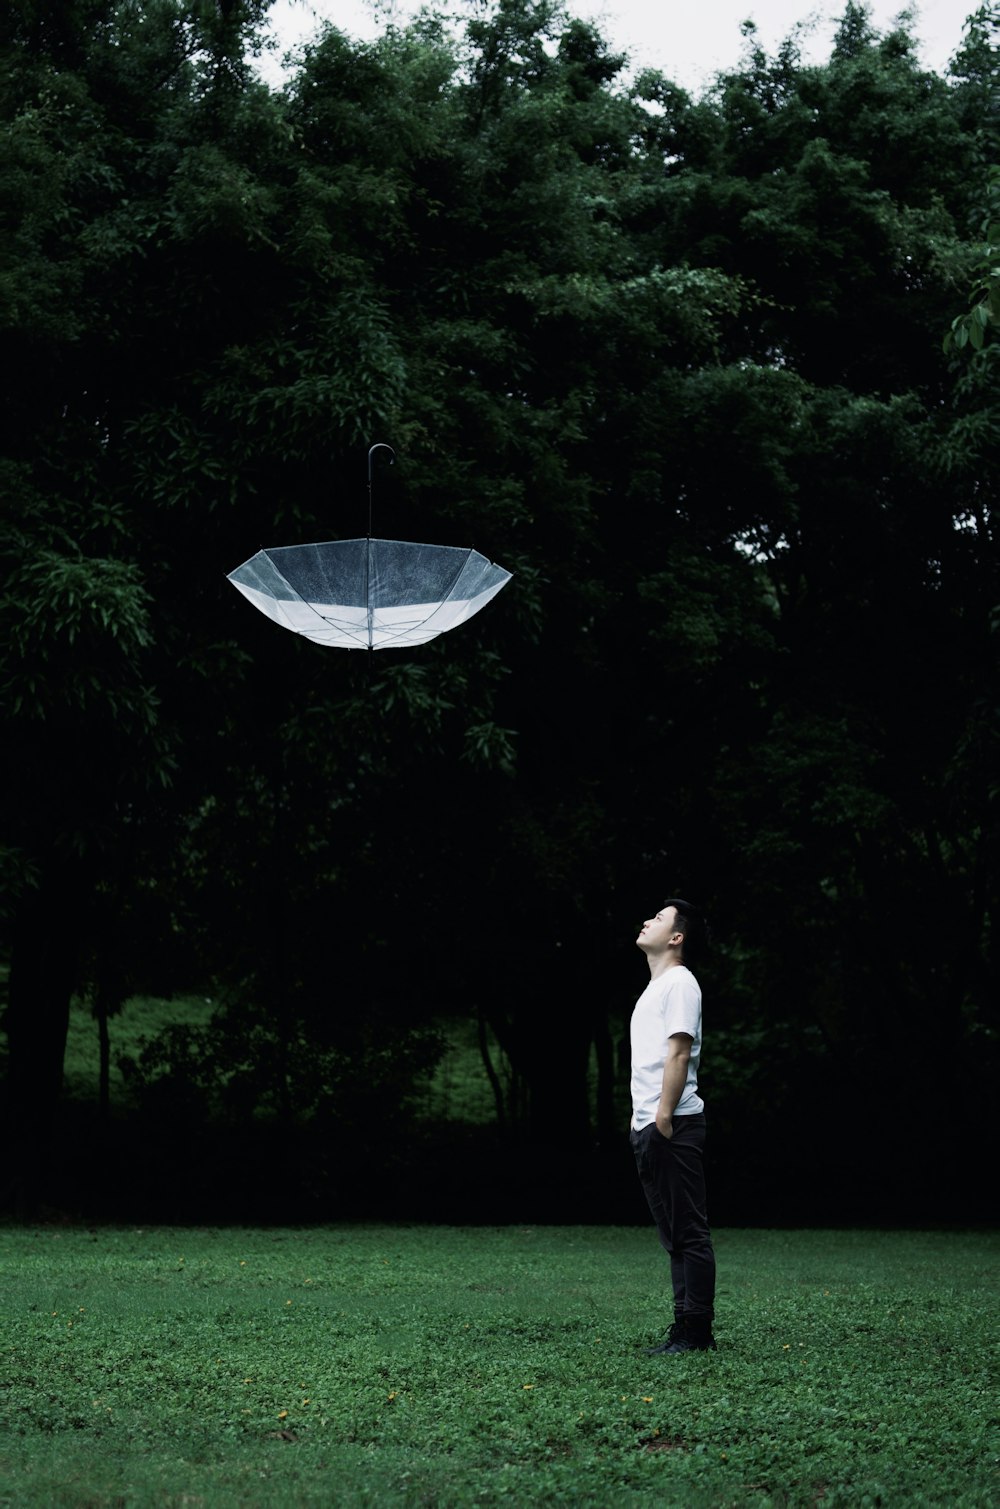 a man standing in a grassy area looking at a large white object